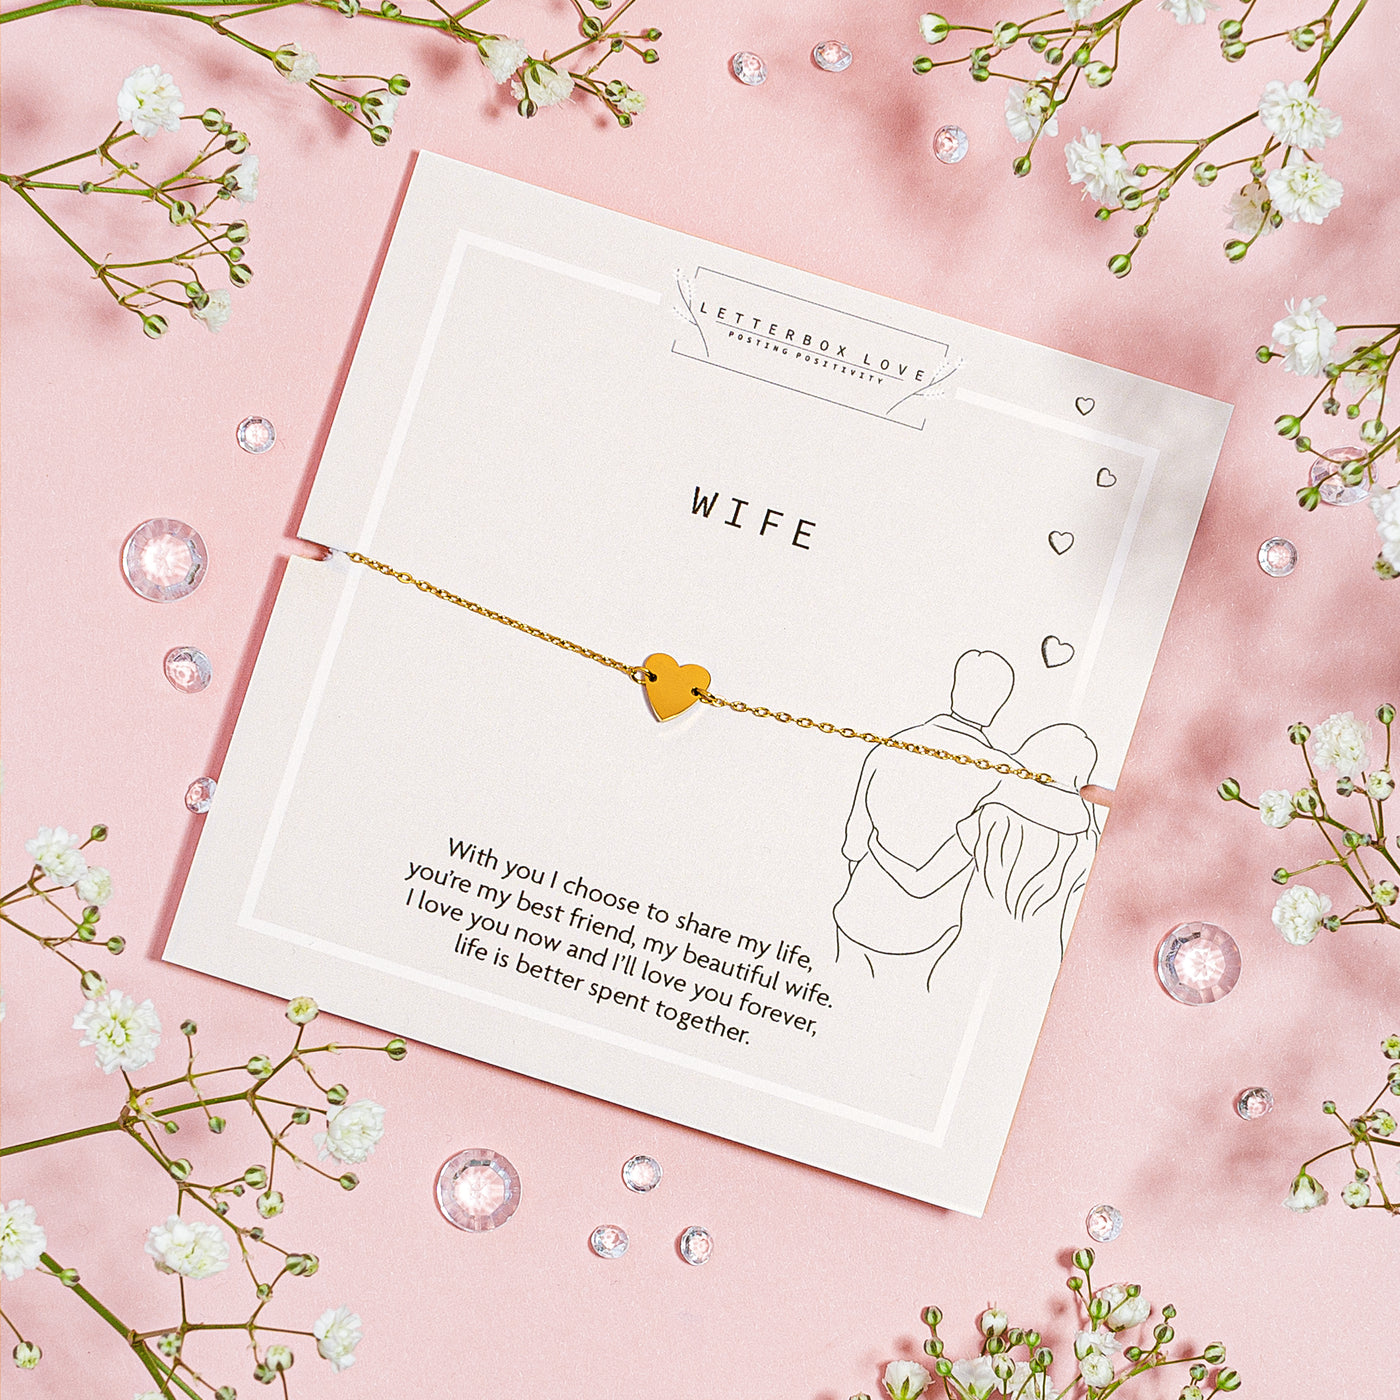 A dainty gold bracelet with a small, solid heart charm presented on a white card with the word 'WIFE' in bold, centered text. Below the bracelet, a loving message to a wife is printed, expressing lifelong commitment and affection.